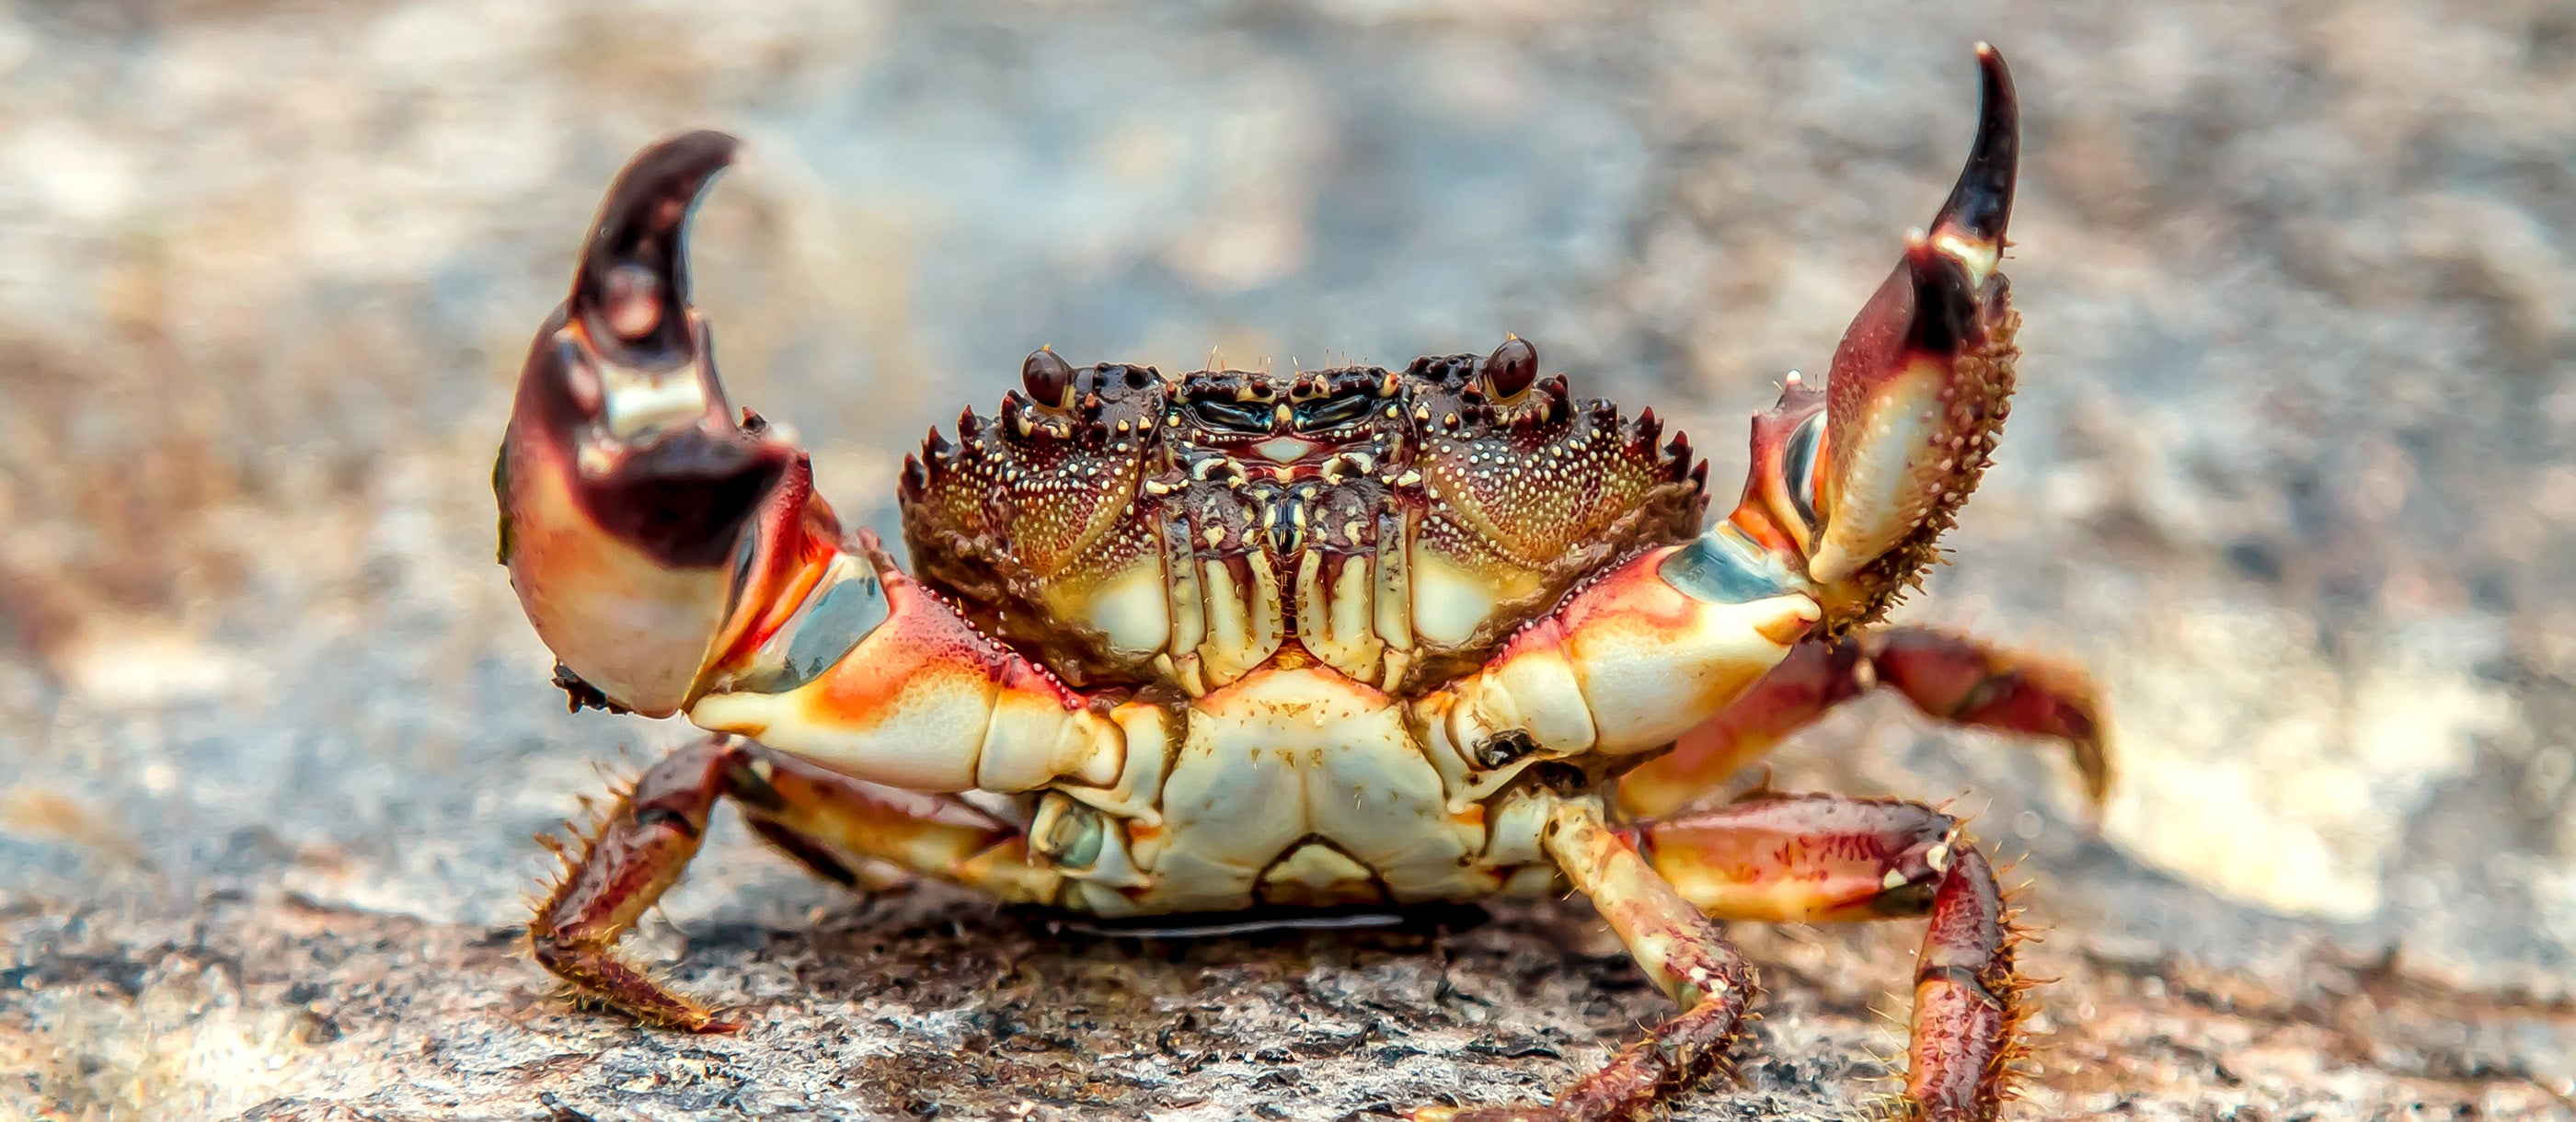 Fun facts about crabs